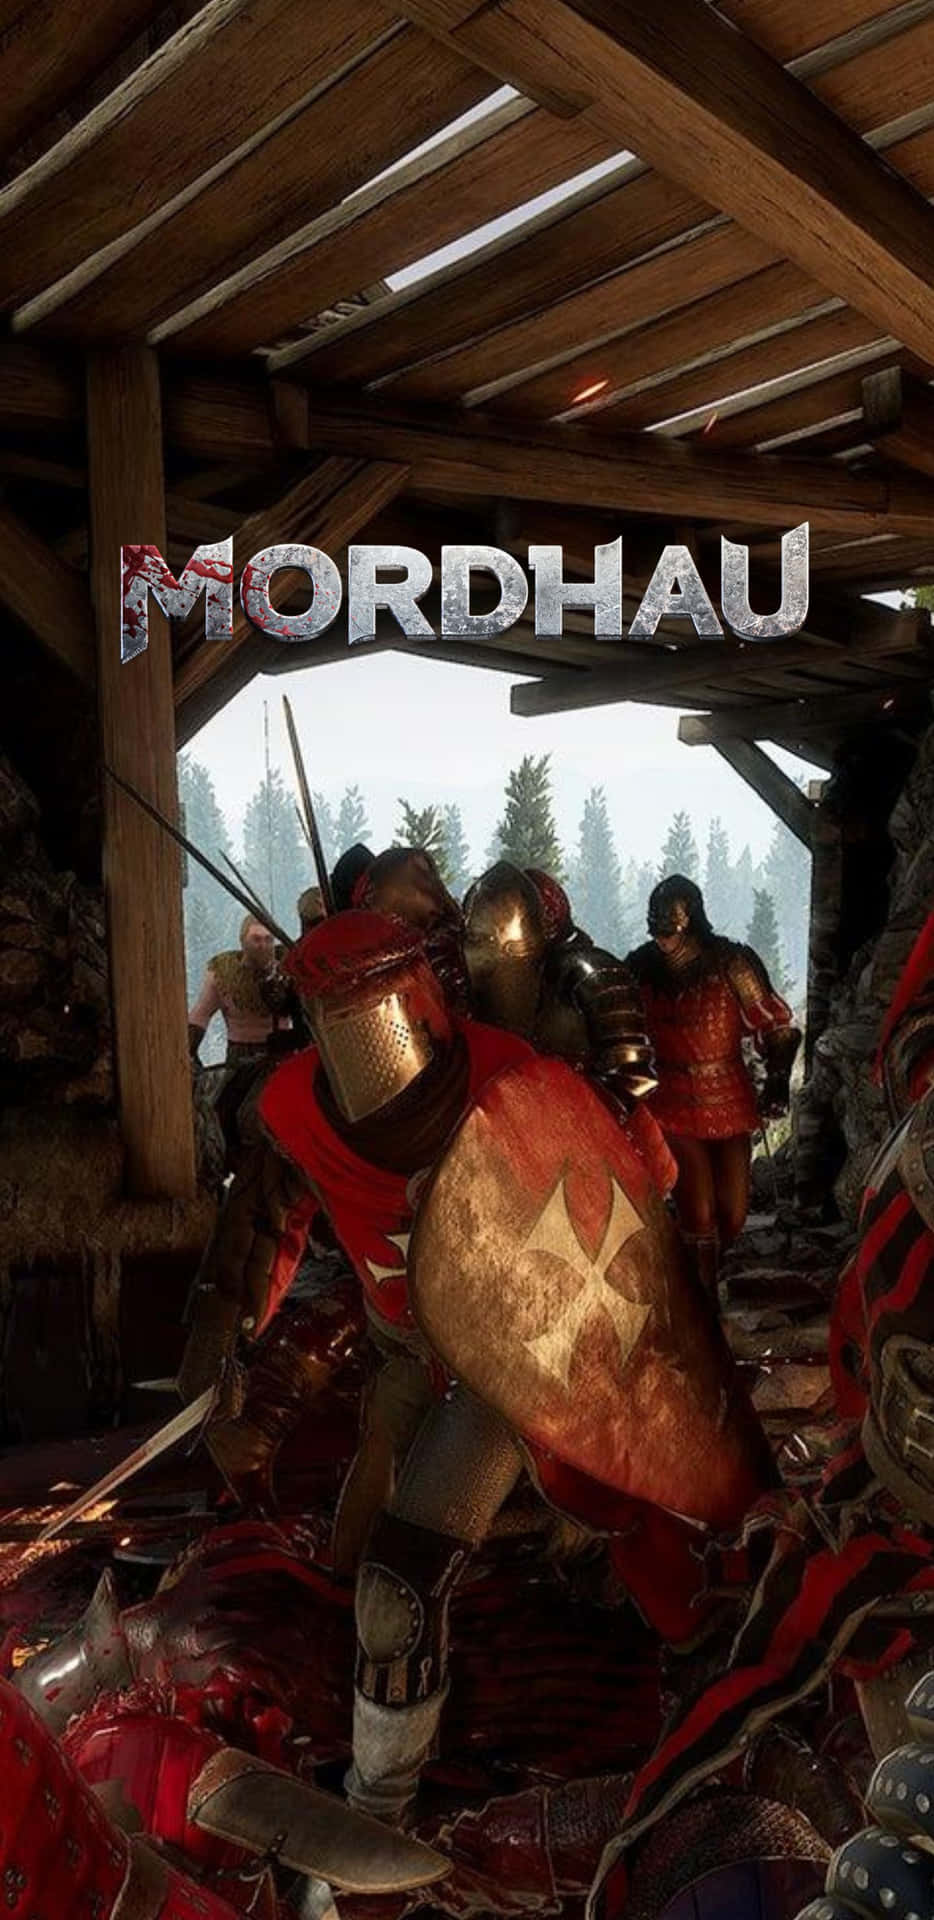 Adventure Awaits in Mordhau with the Pixel 3XL